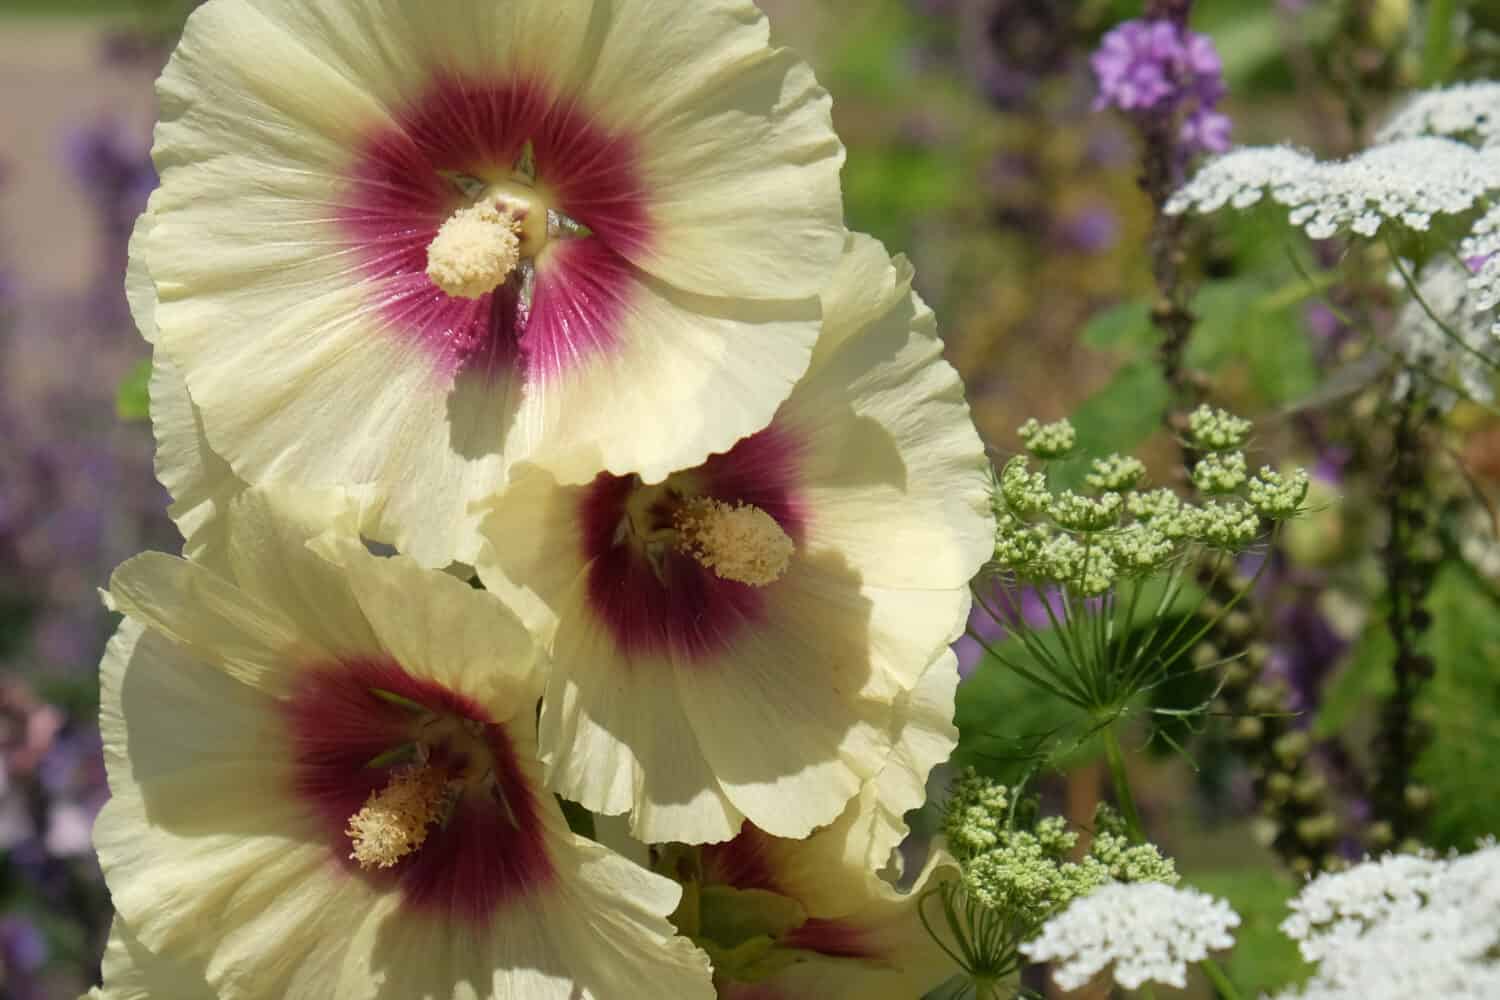 Alcea 'Halo Cream' hollyhock in bloom among the daisies during the summer months,